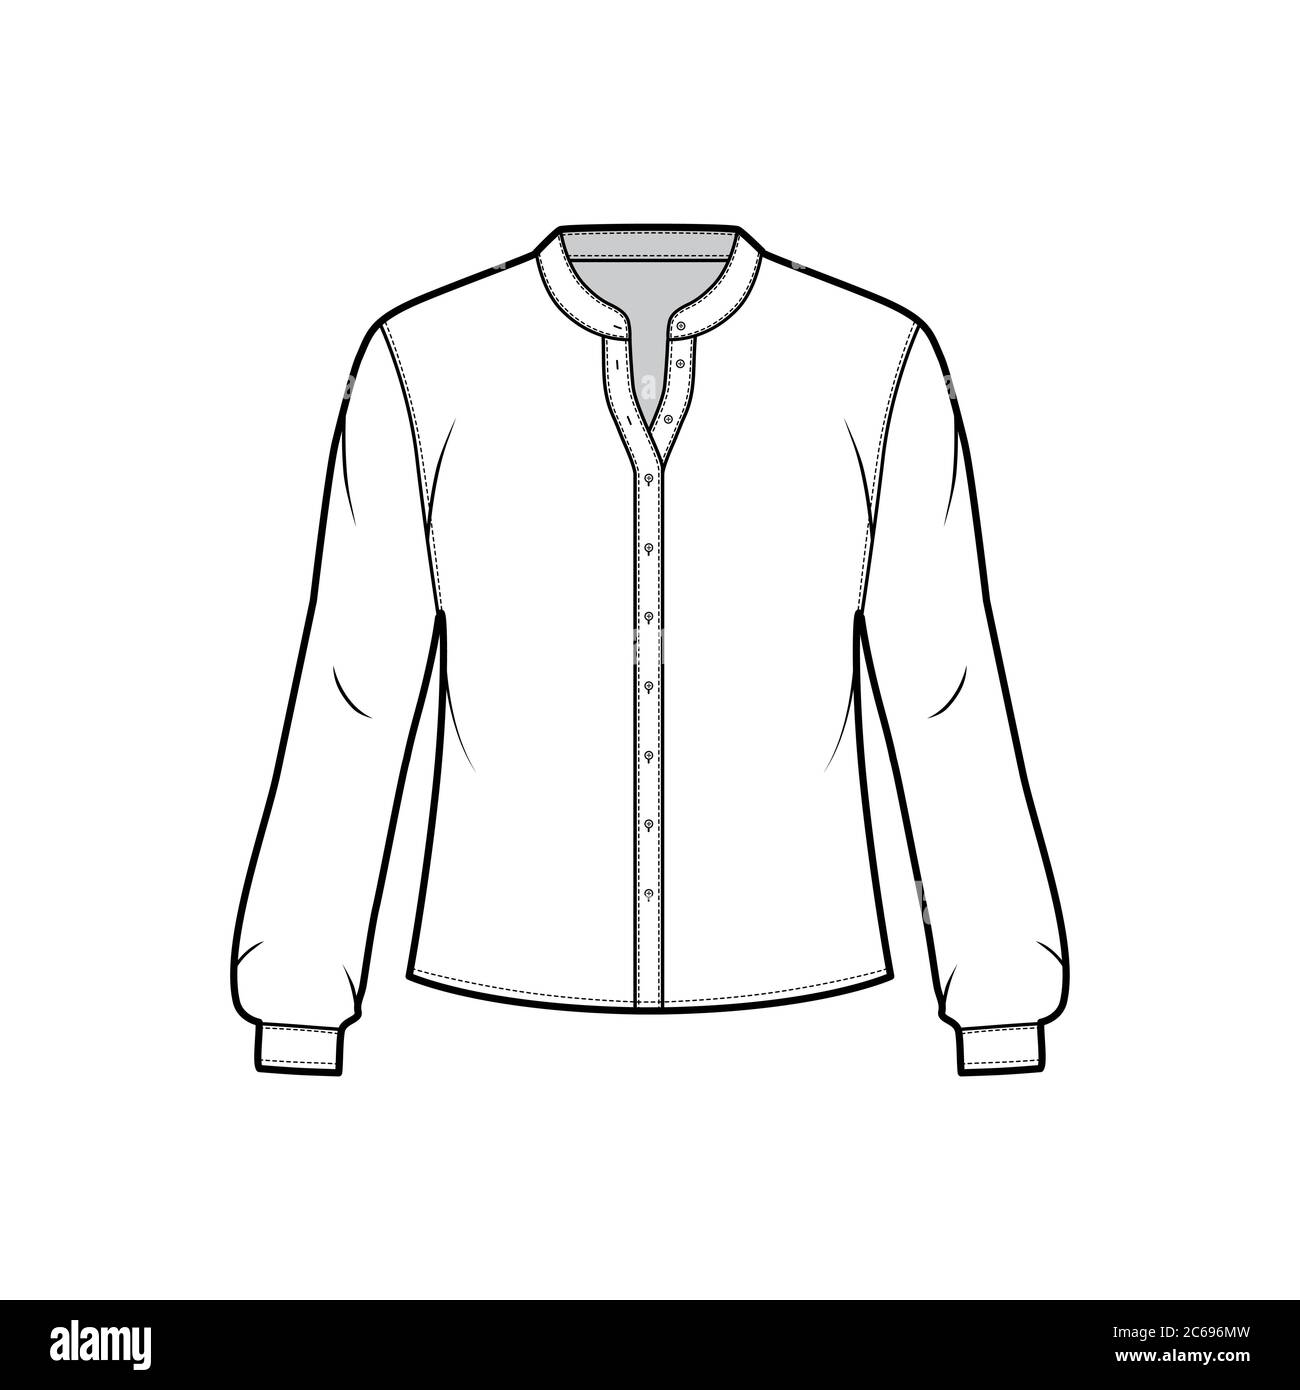 Shirt technical fashion illustration with curved mandarin stand collar ...